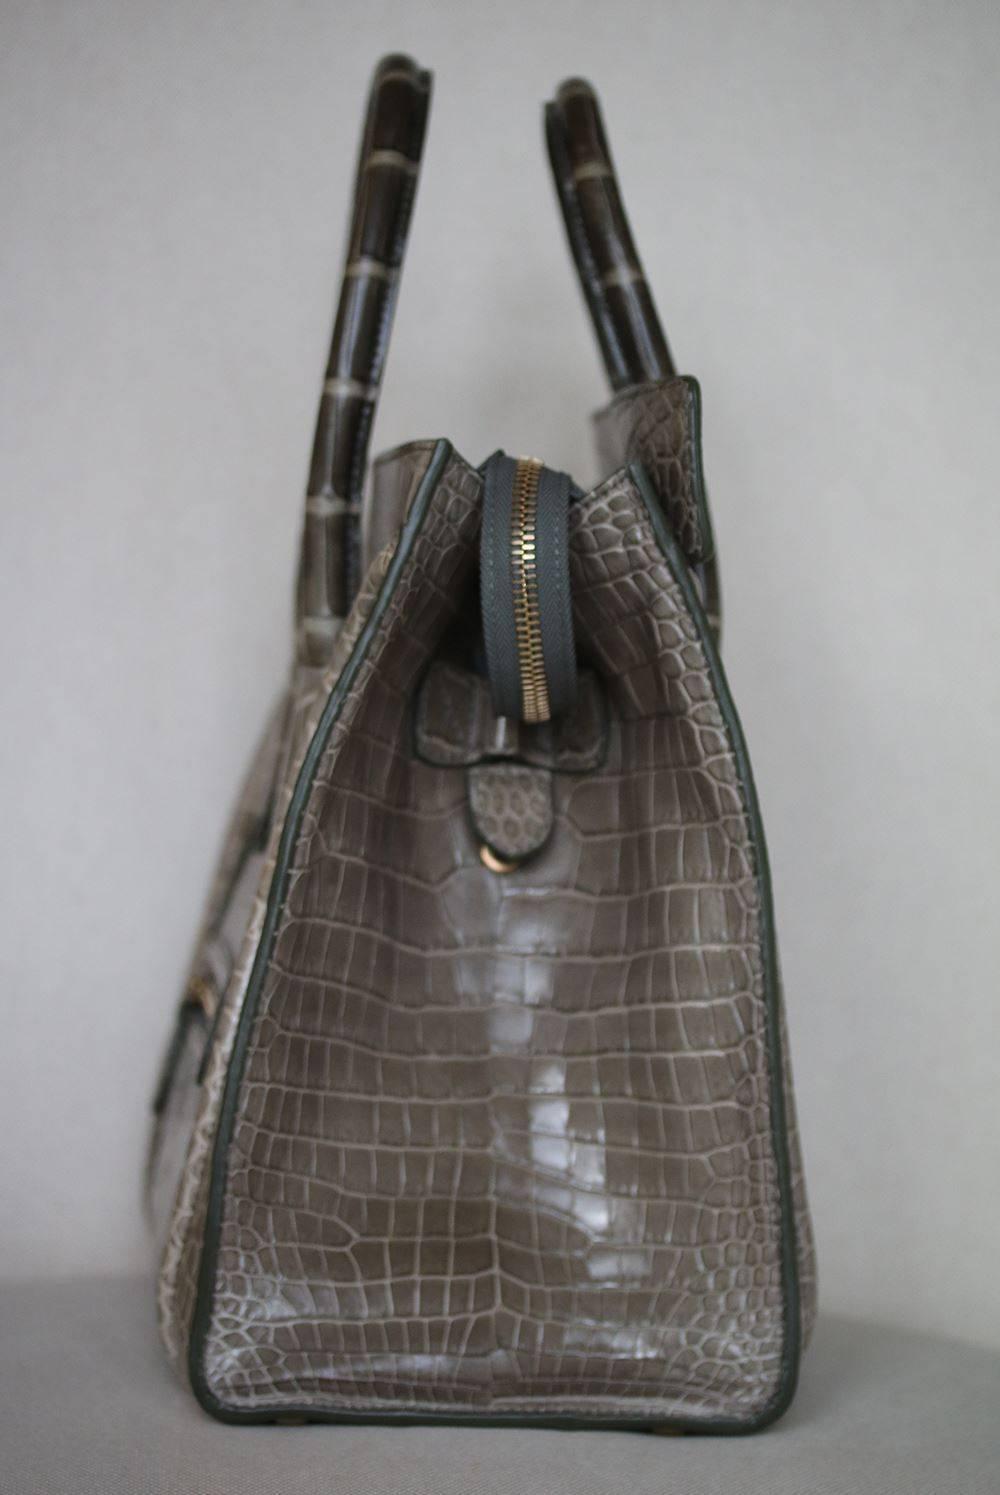 Celine Crocodile Handbag with Goldtone Hardware in beautiful crocodile leather in the most beautiful rich khaki colour with tonal green stitching. 
 
Condition - Leather is still stiff and untarnished. Has full feeling of a new bag. As new